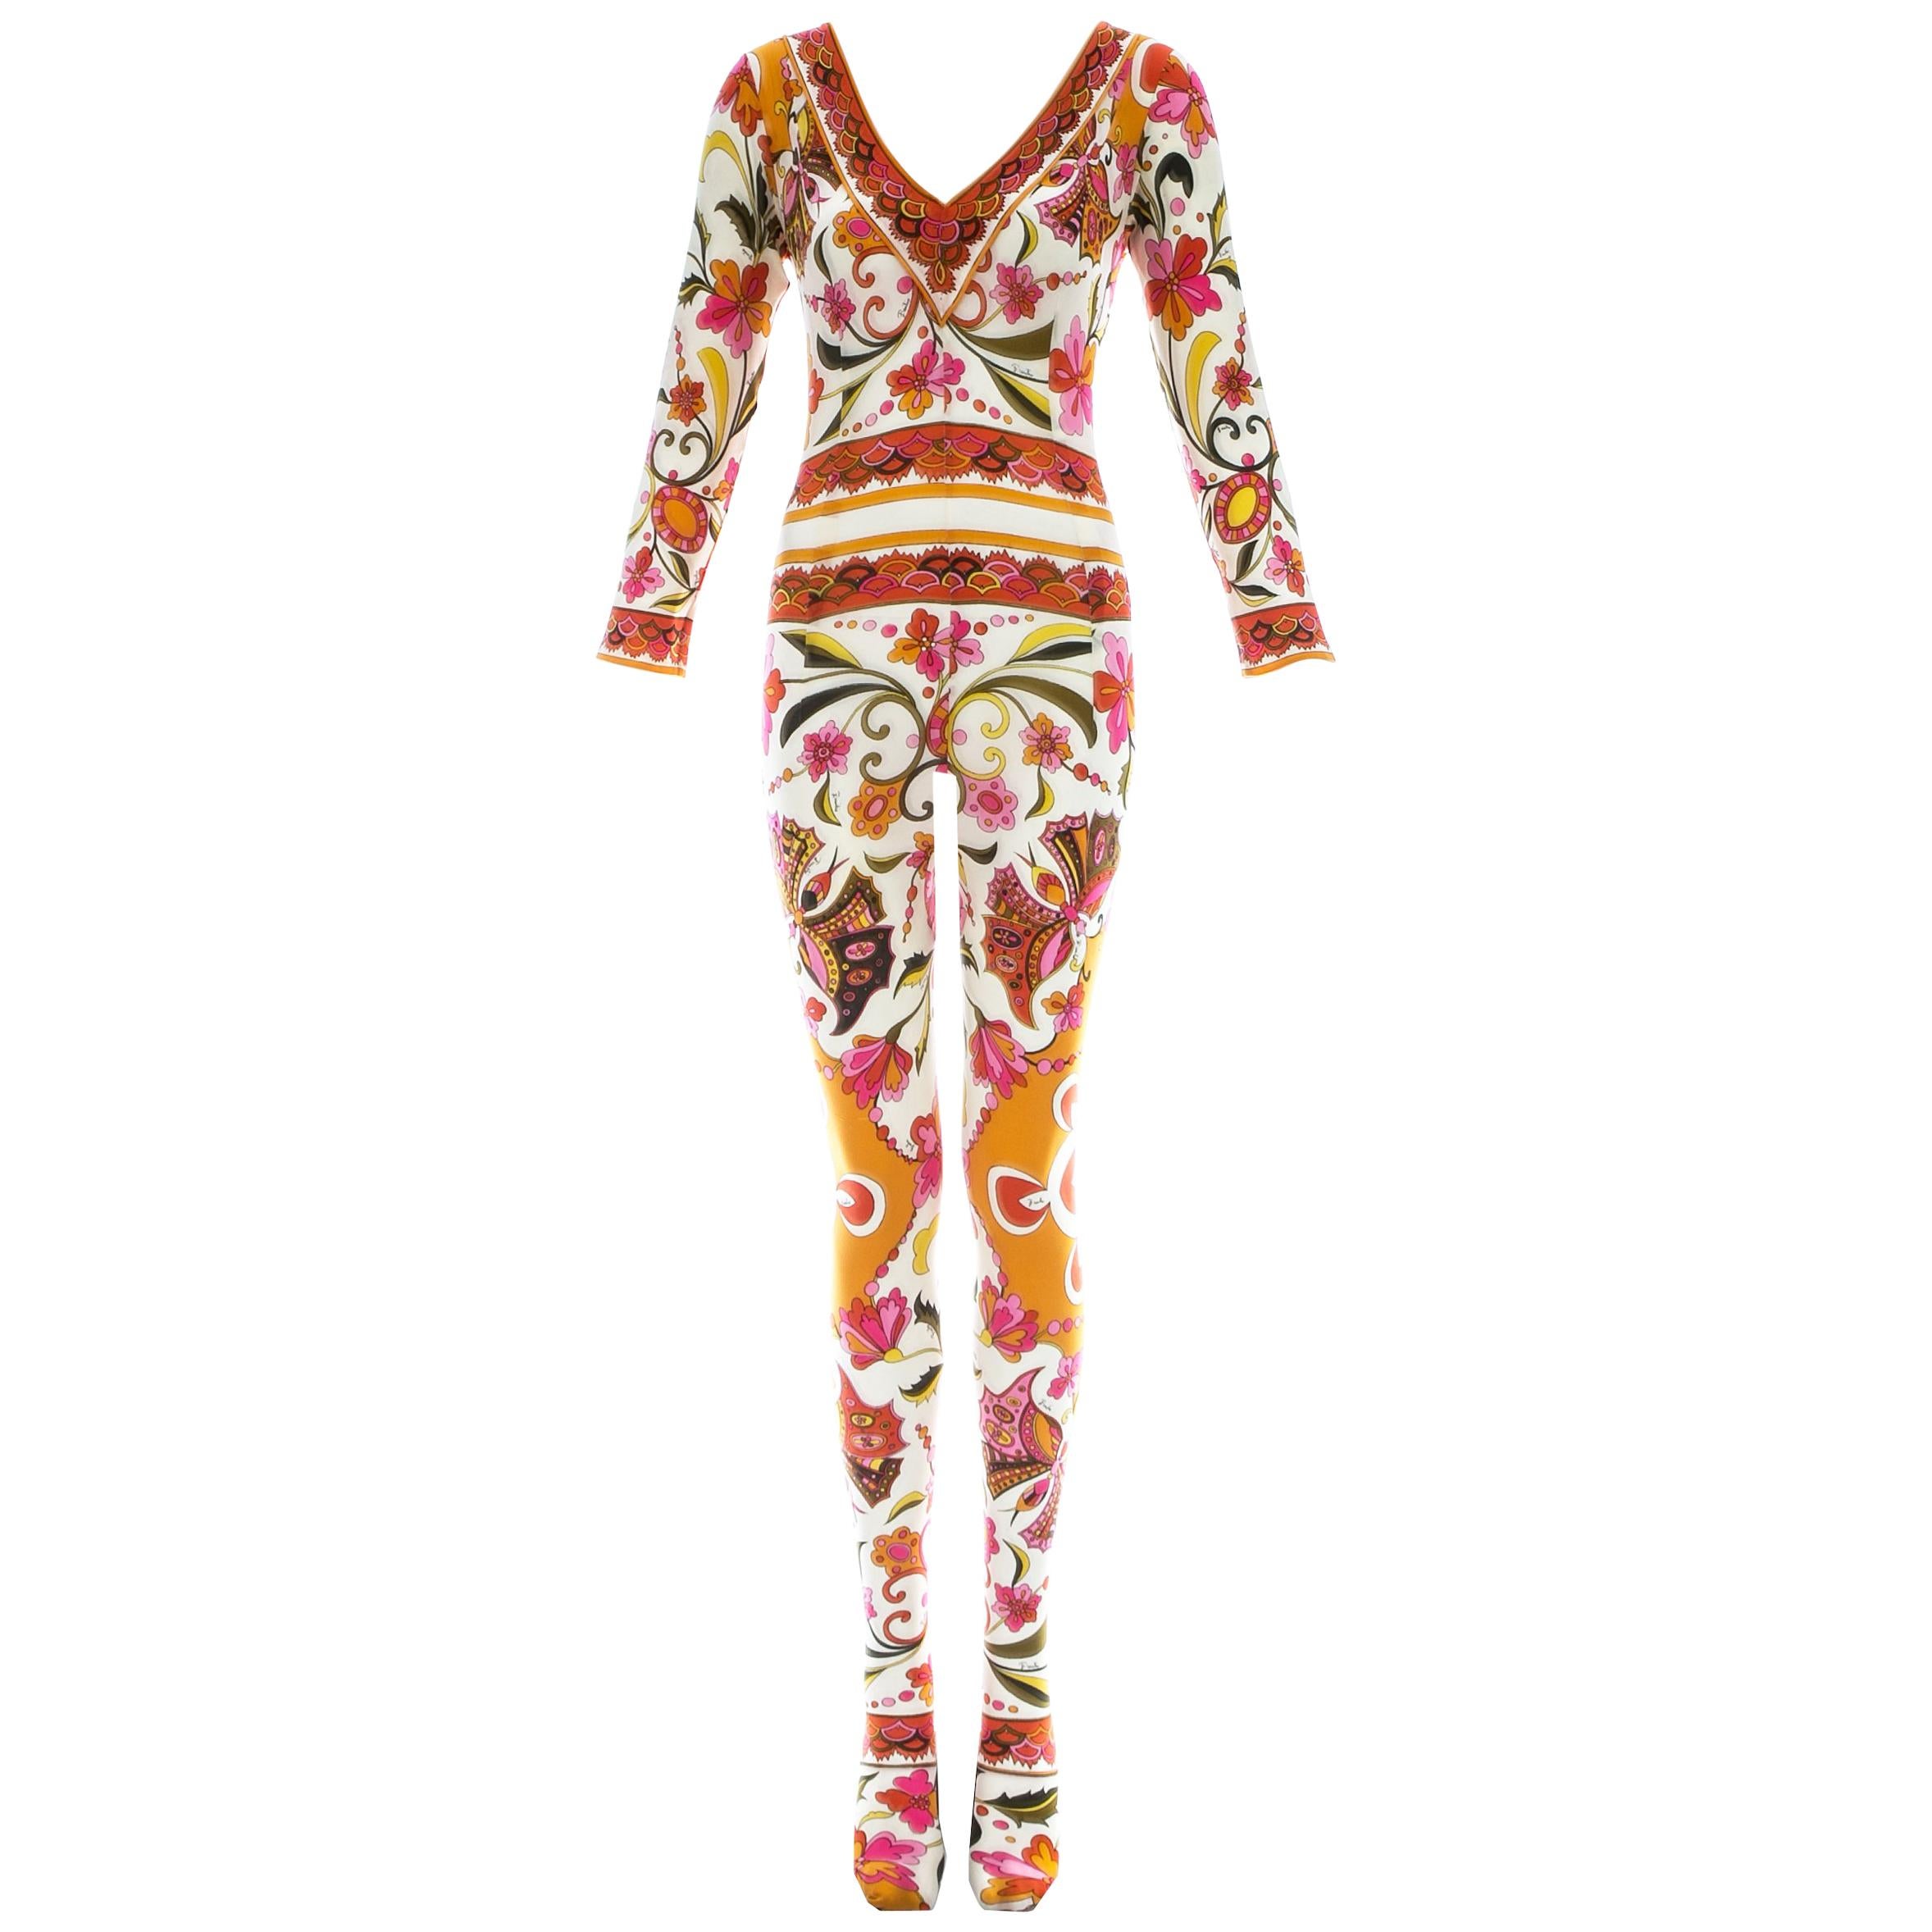 Emilio Pucci nylon floral printed body stocking, Spring-Summer 1966 For Sale